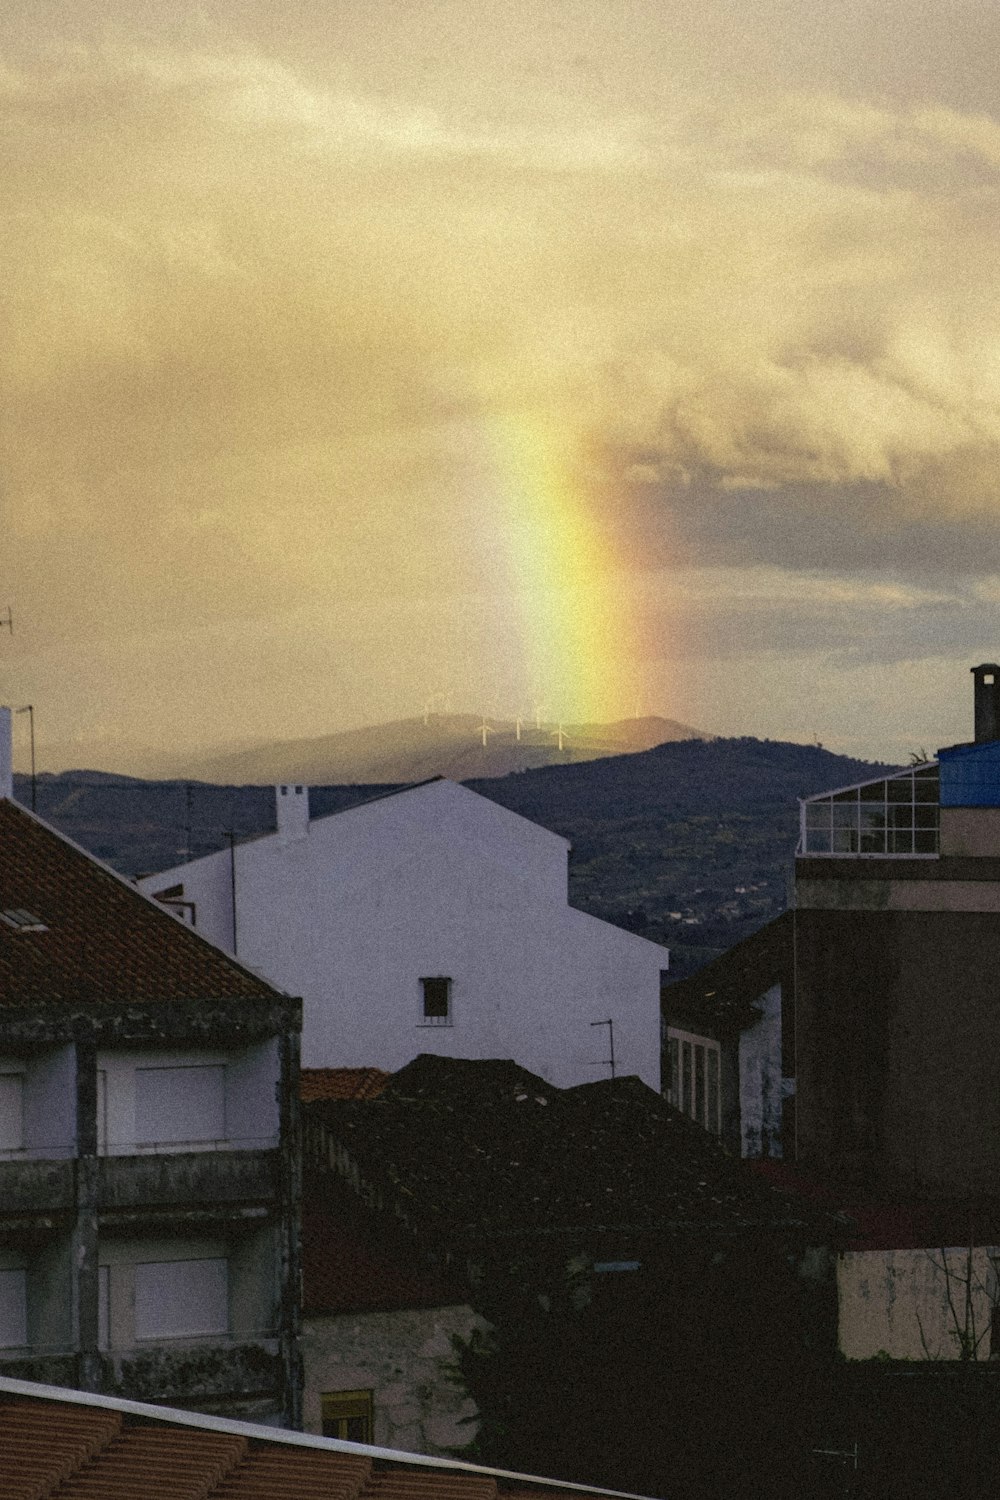 a rainbow shines in the sky over a city